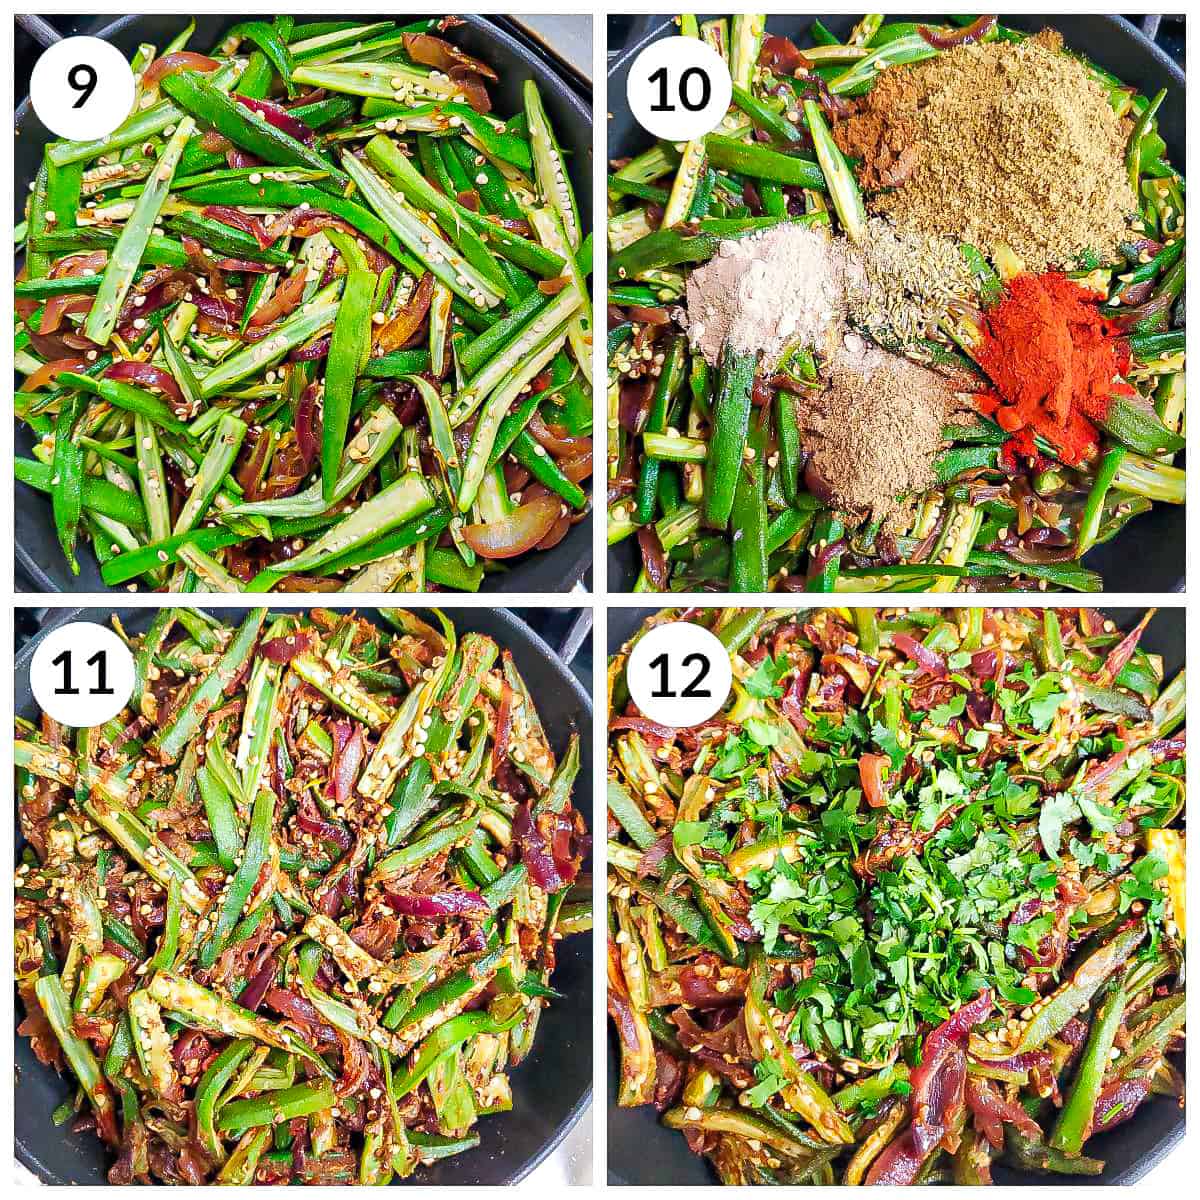 Steps for cooking bhindi with spices and herbs to make bhindi do pyaza